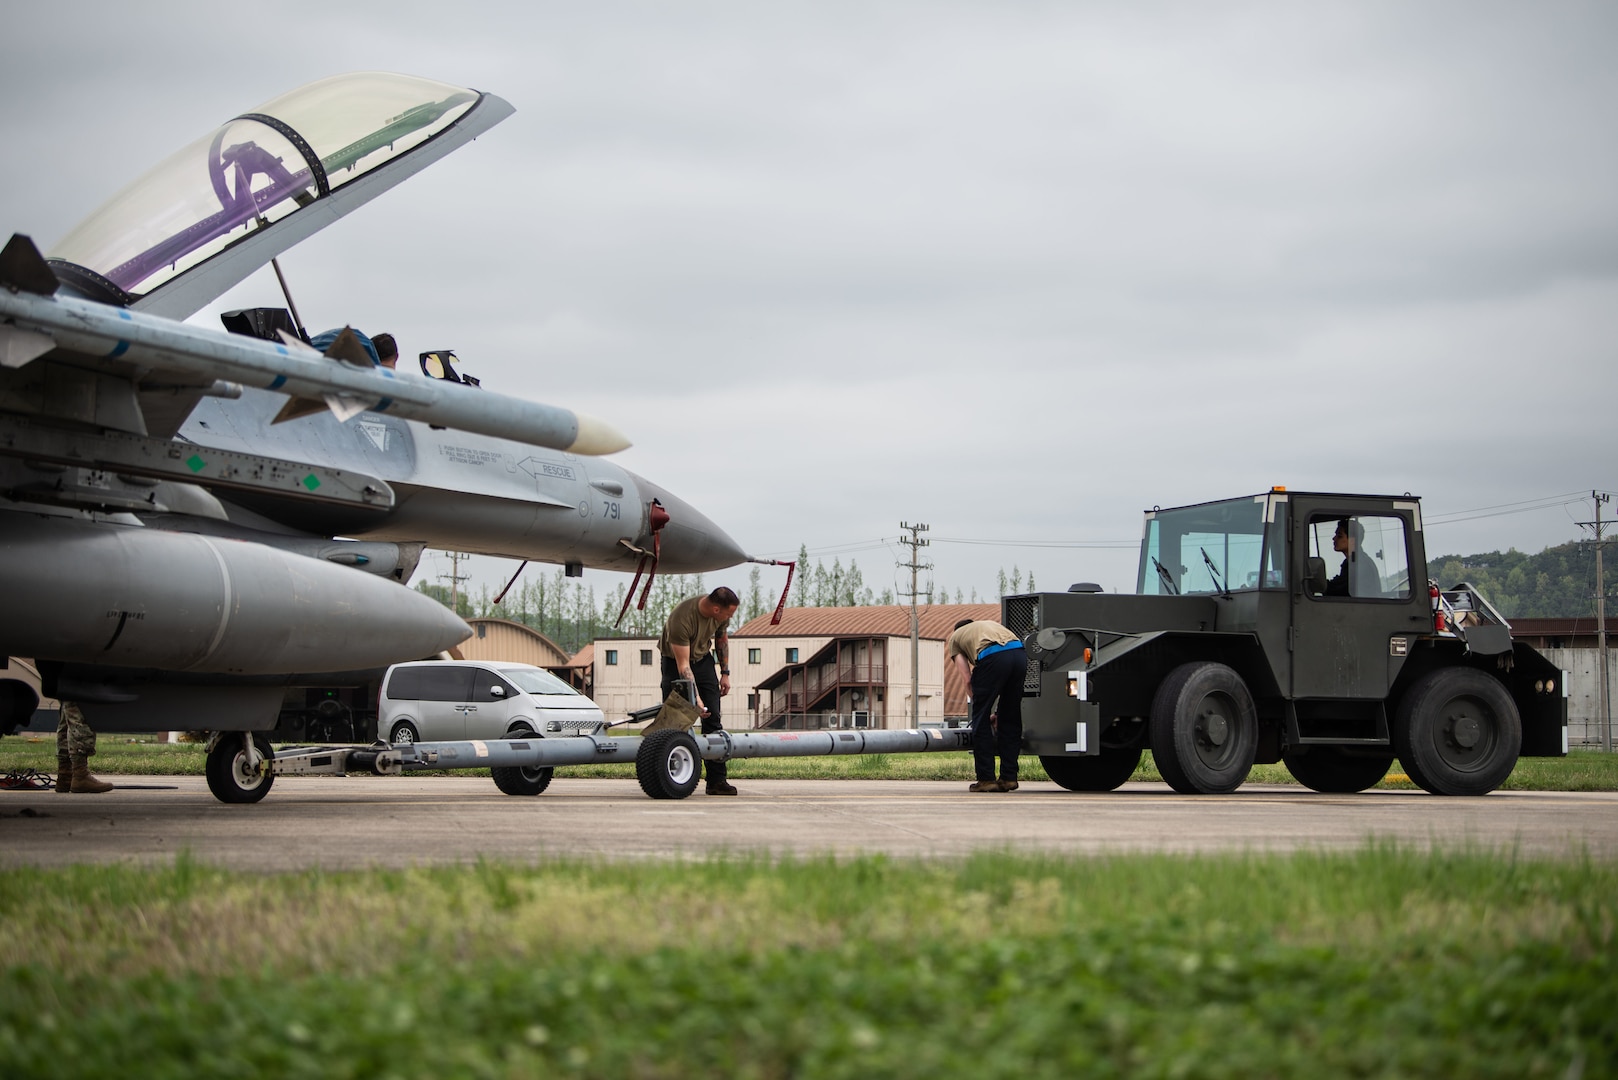 Maintainers show off contingency capabilities during Korea Flying Training 23